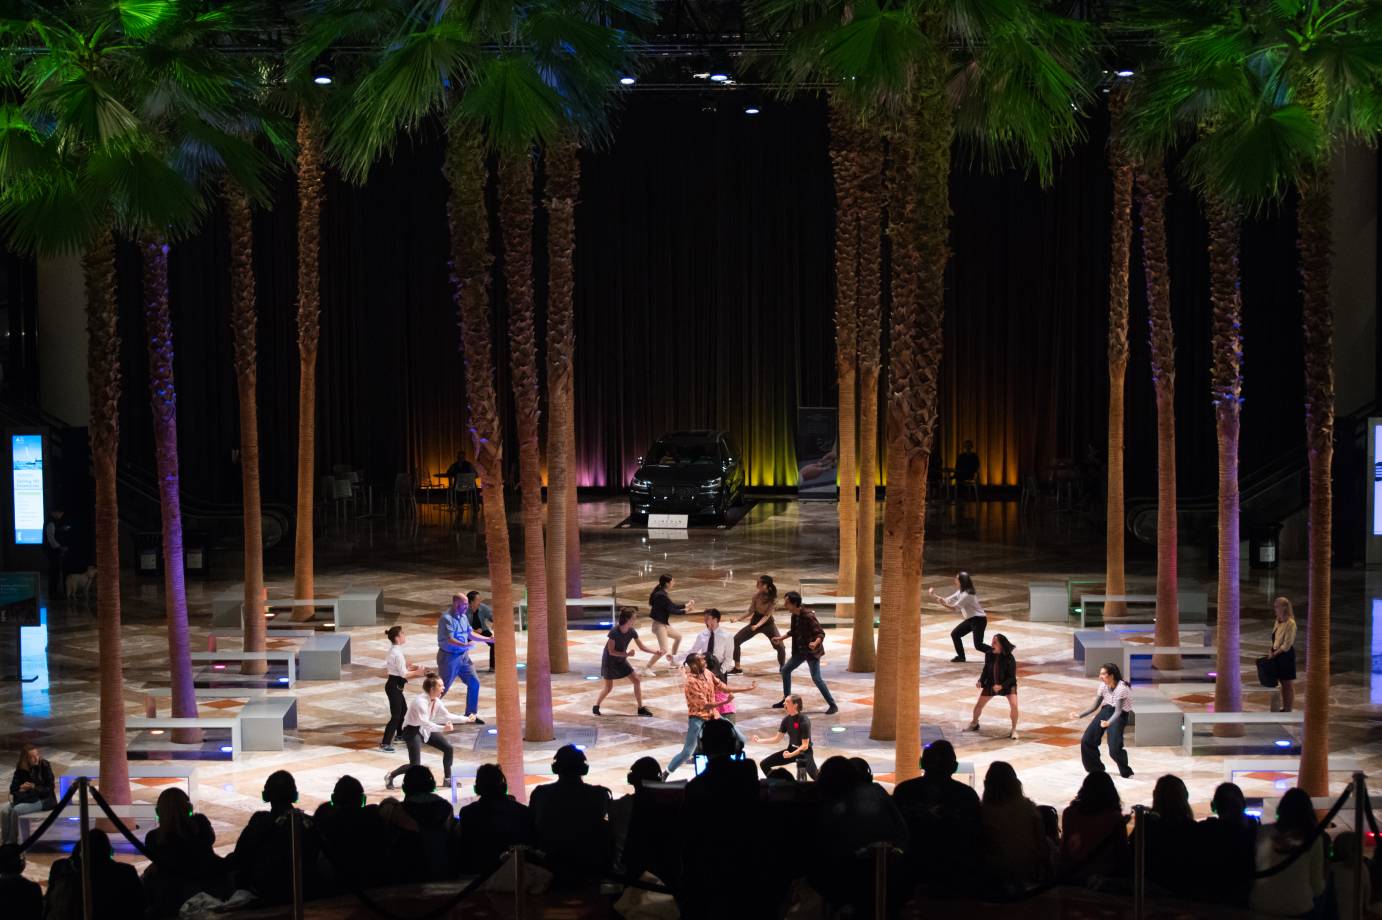 A god's eye view of the company dancing among palm trees